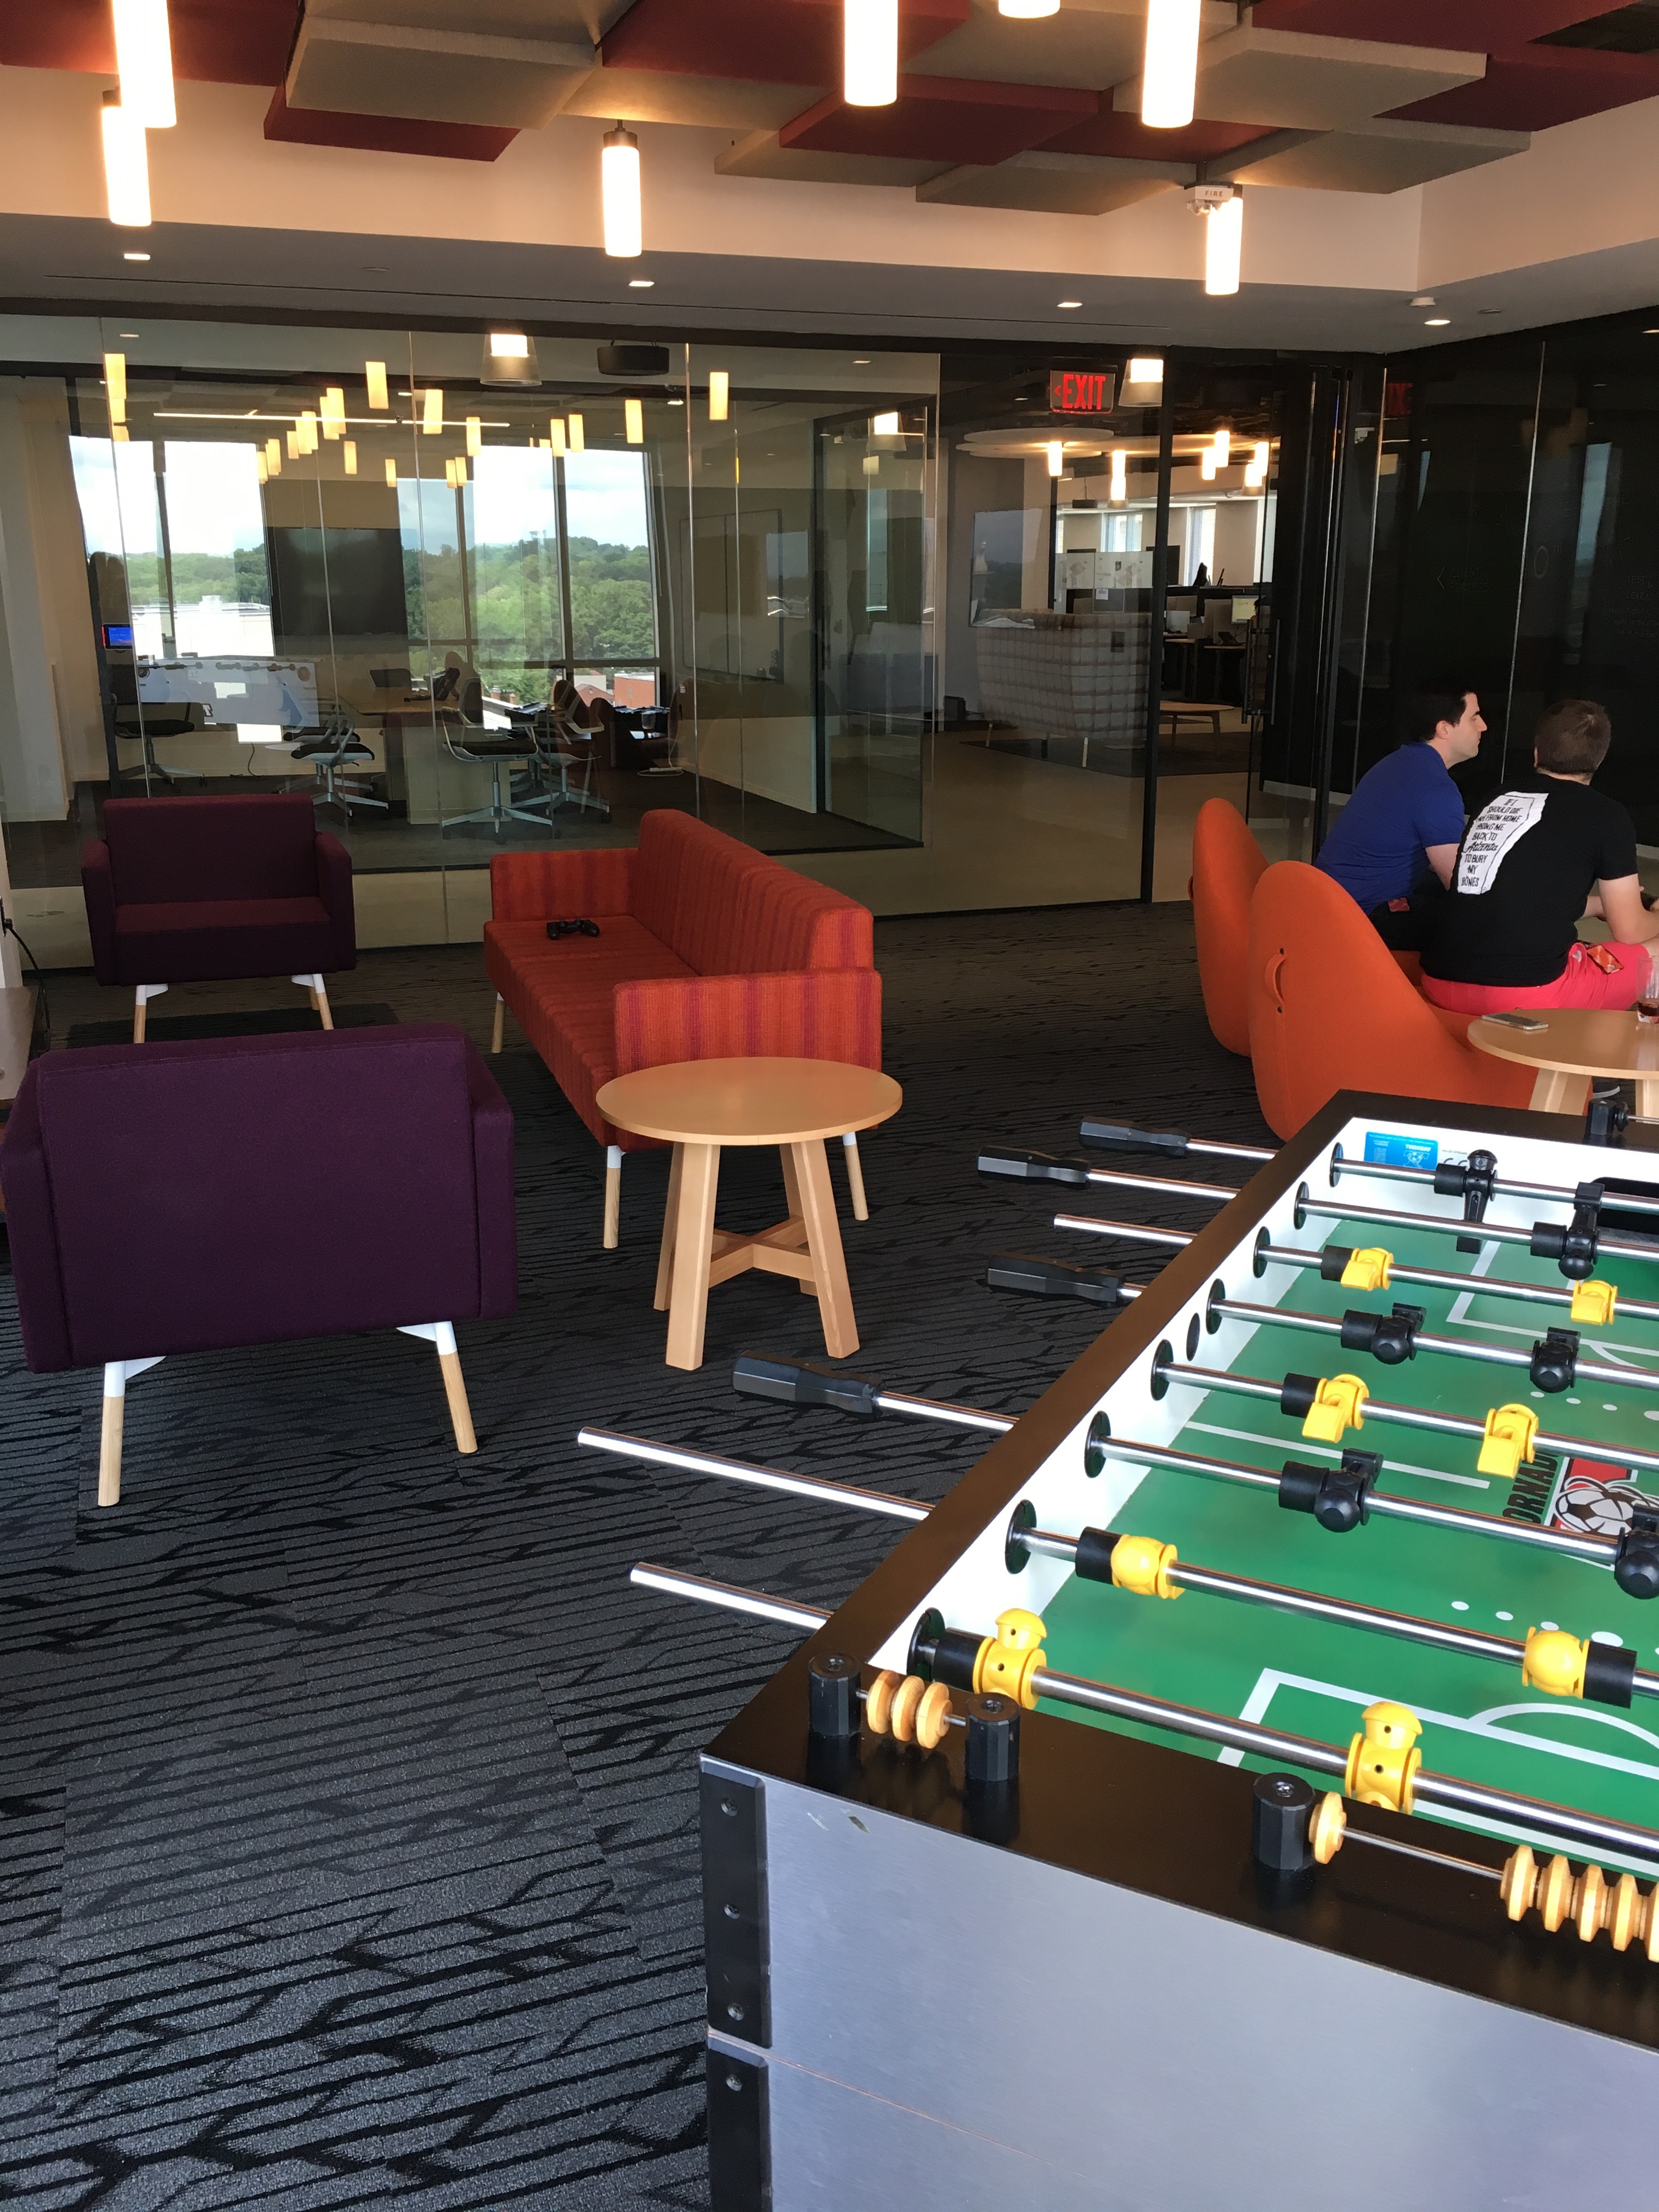 One of the game rooms at APT's new office